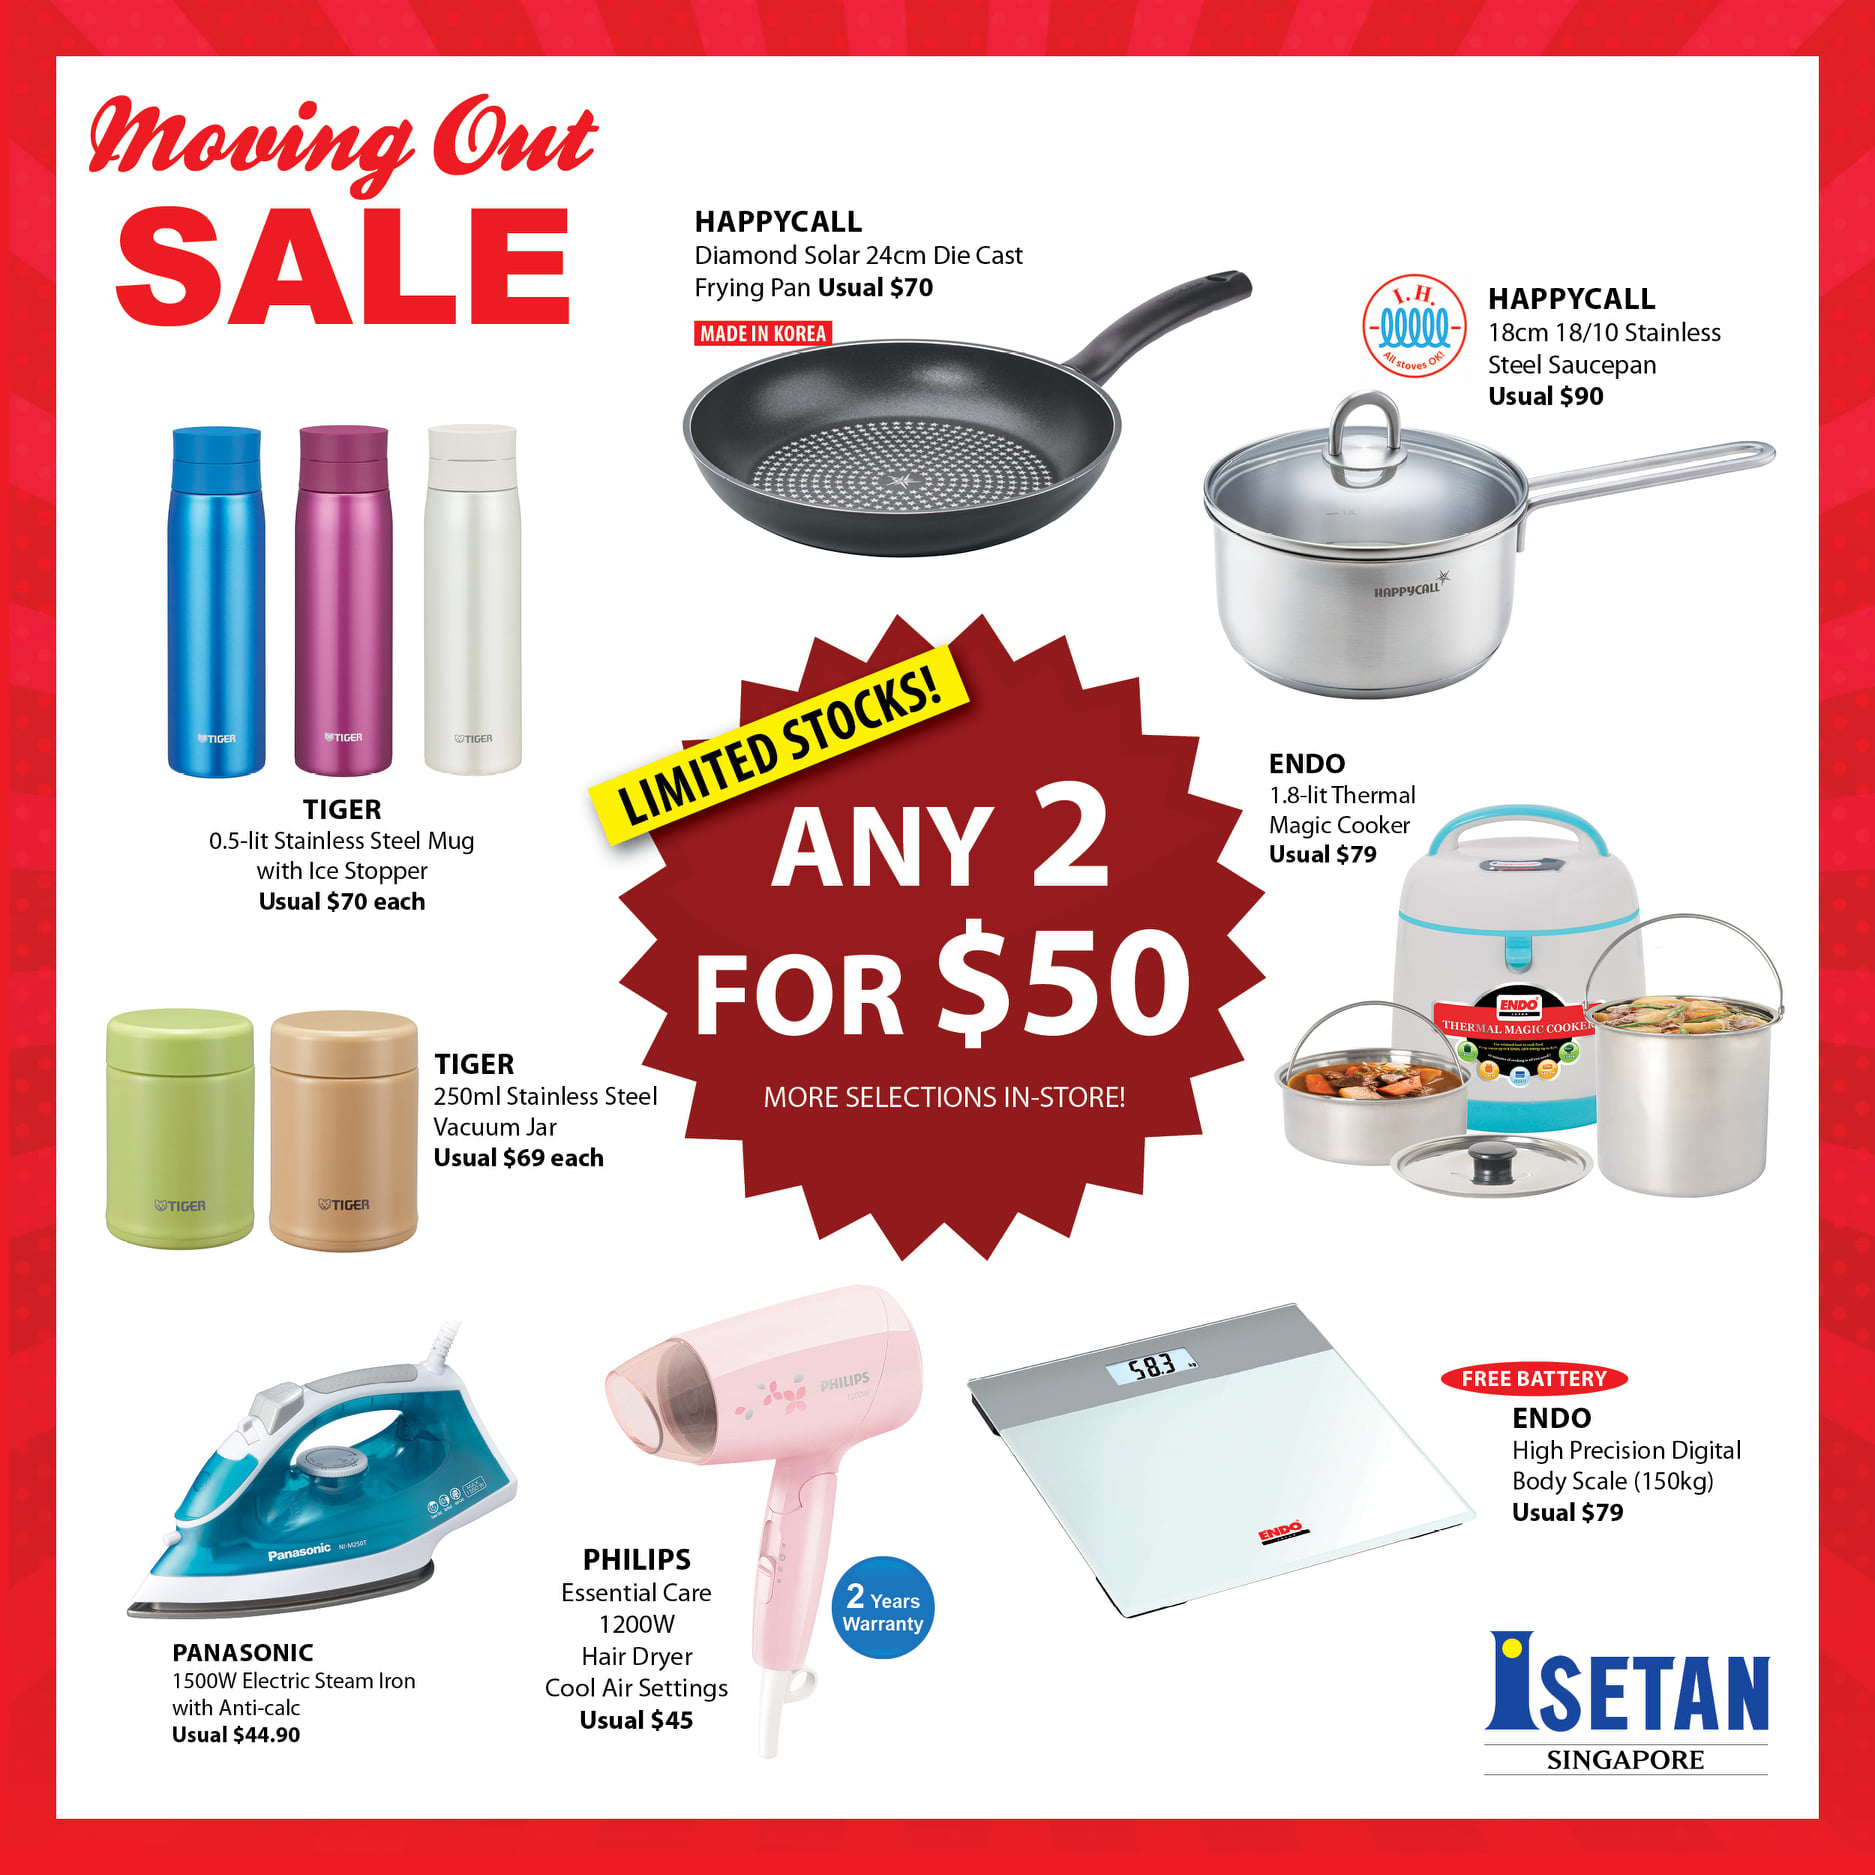 Isetan Westgate closing down sale up to 80% off till Jan. 26, 2020 - Mothership.SG - News from ...